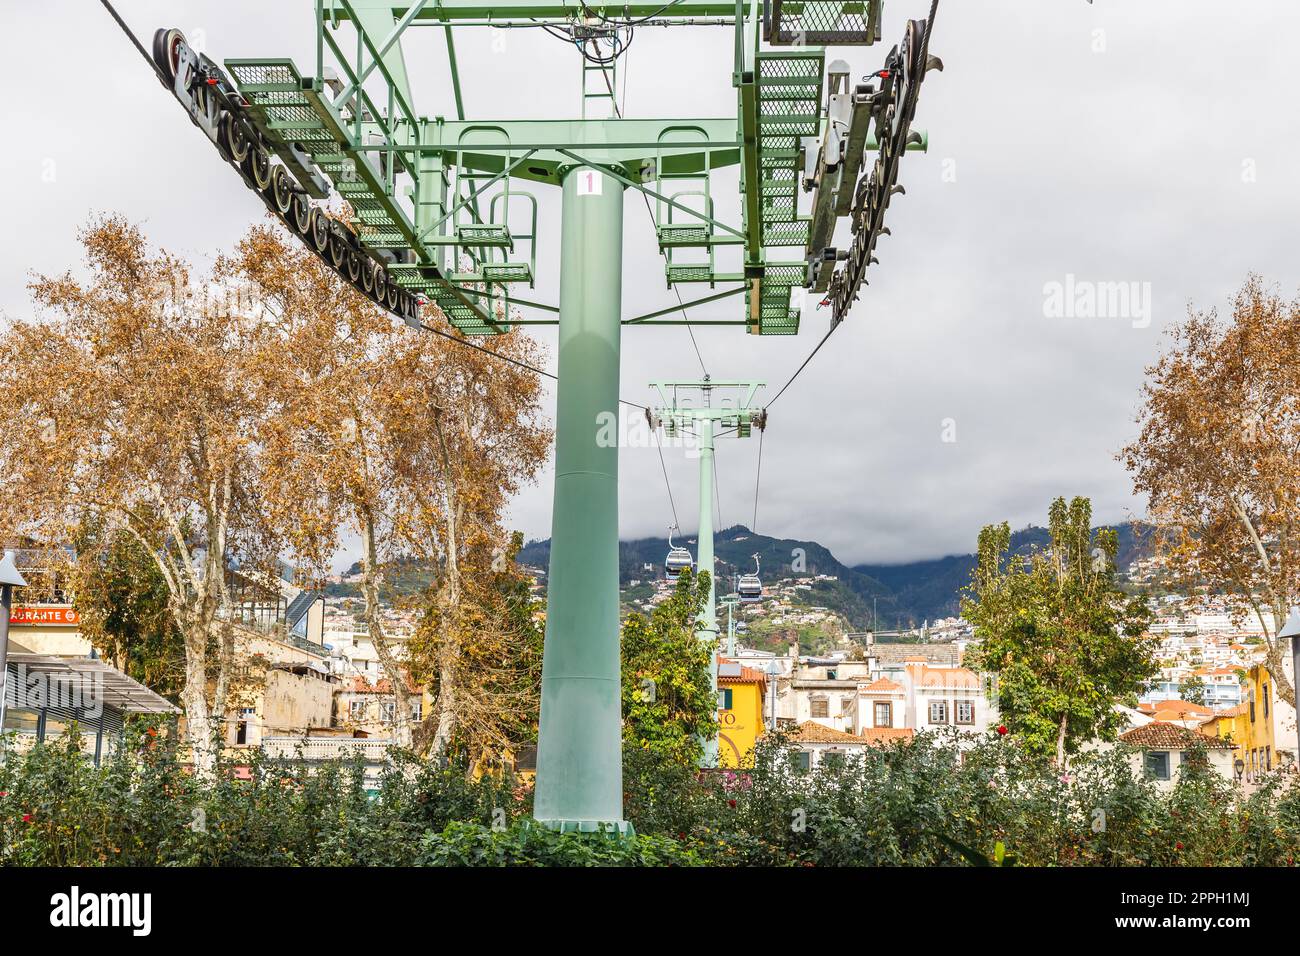 Street atmosphere around the Funchal-Monte urban cable car in Madeira Stock Photo